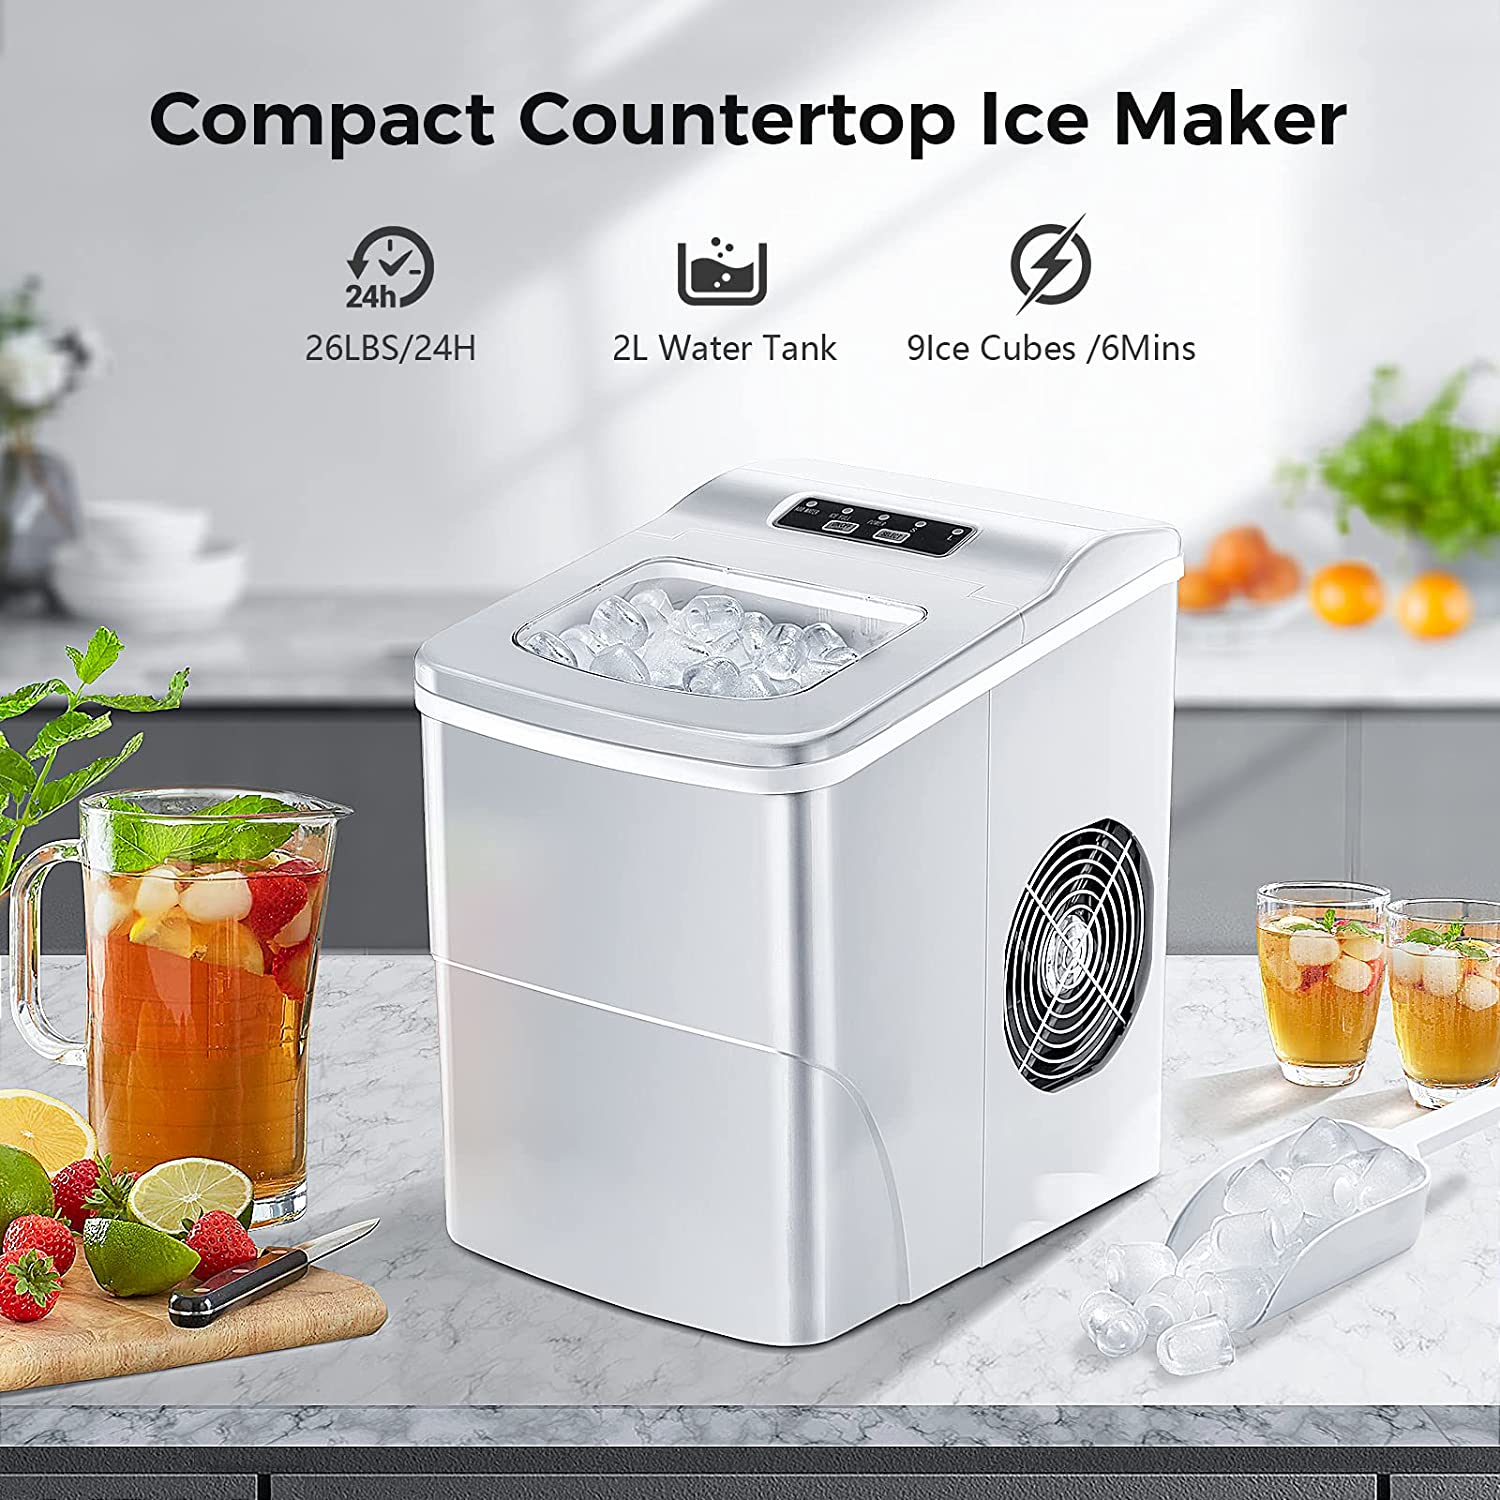 https://bigbigmart.com/wp-content/uploads/2023/05/AGLUCKY-Countertop-Ice-Maker-Machine-Portable-Ice-Makers-Countertop-Make-26-lbs-ice-in-24-hrsIce-Cube-Ready-in-6-8-Mins-with-Ice-Scoop-and-Basket-Grey1.jpg